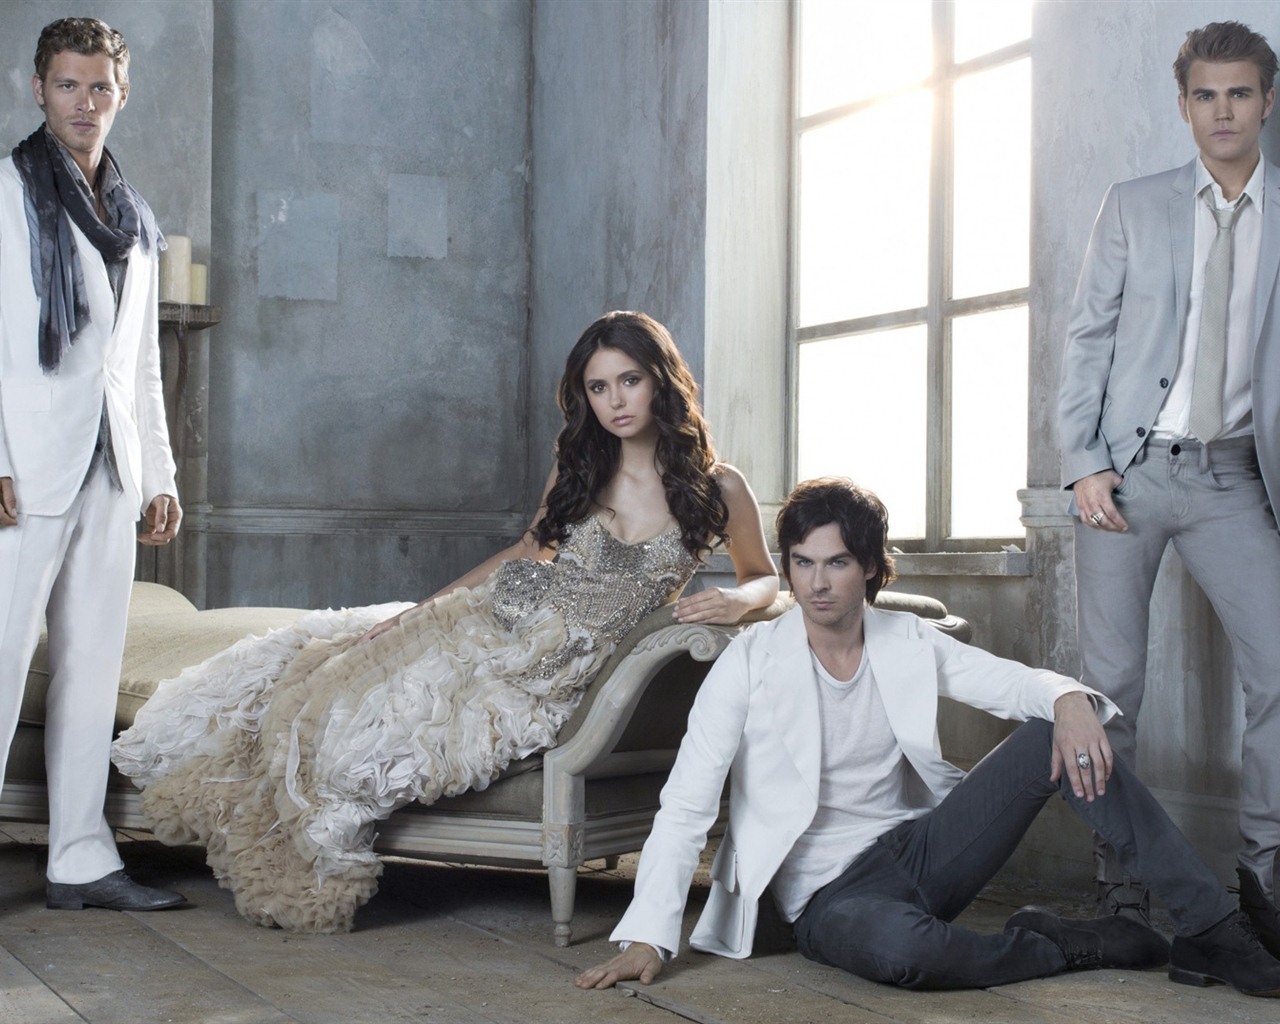 The Vampire Diaries wallpapers HD #8 - 1280x1024